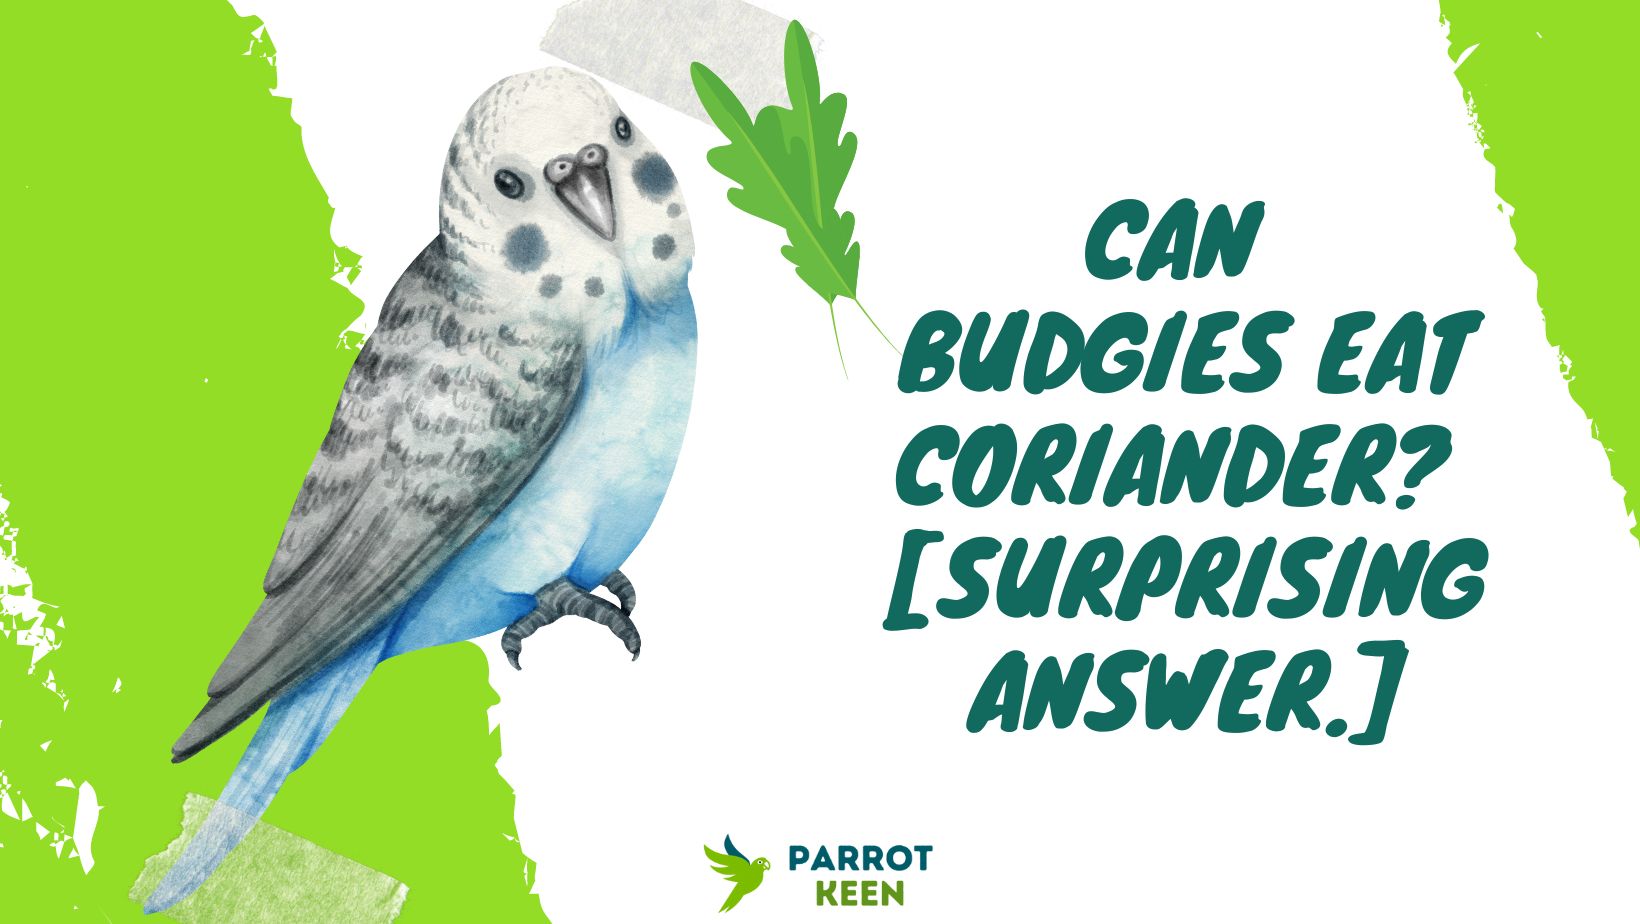 Can Budgies Eat Coriander The Surprising Answer.